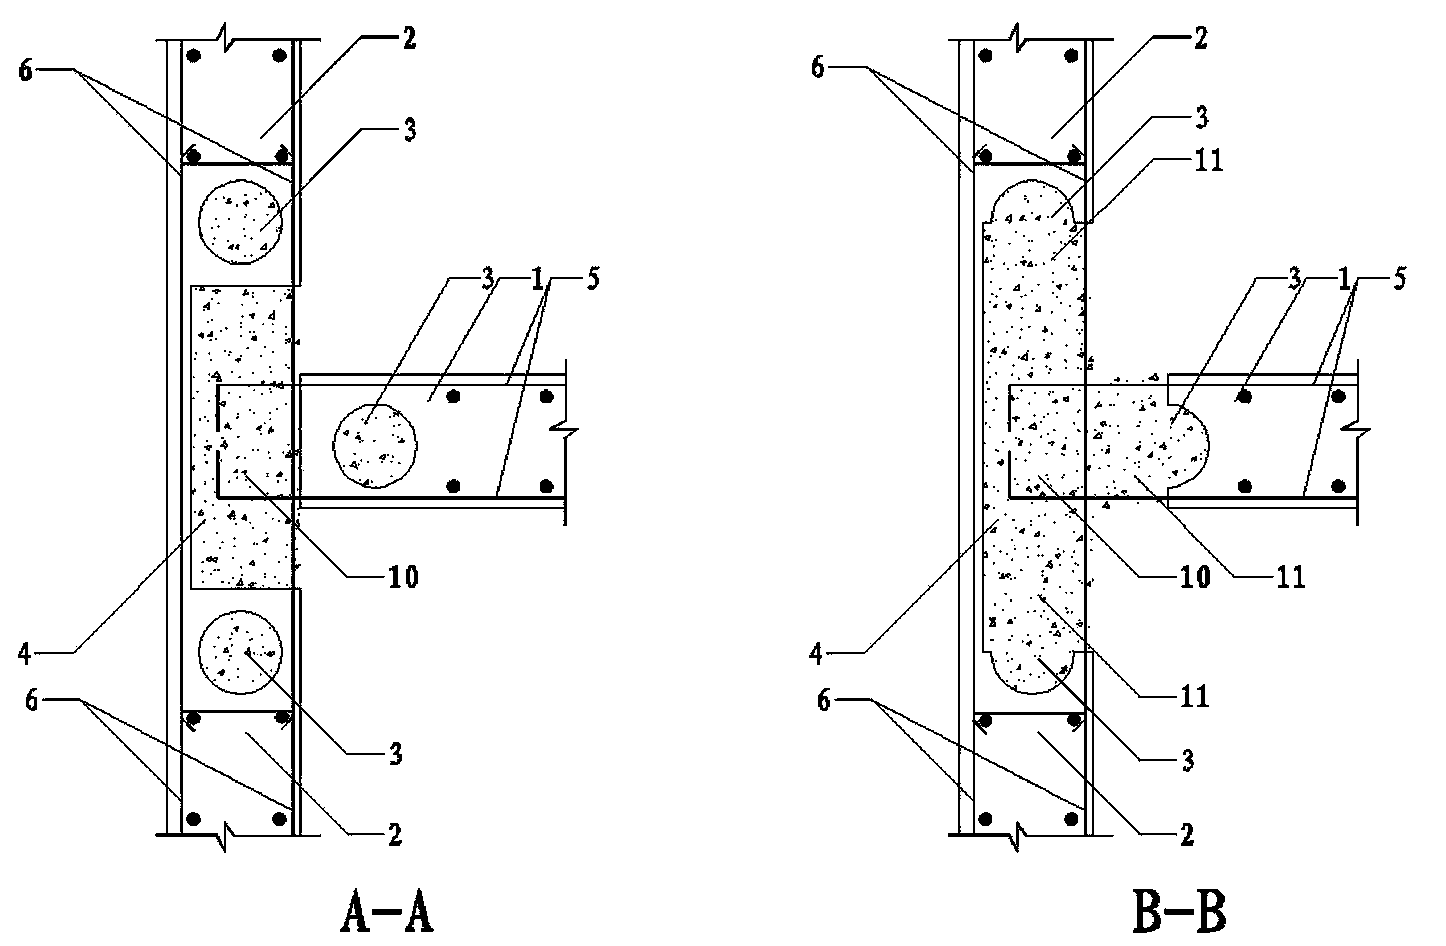 T-shaped prefabricated concrete wall connection joint